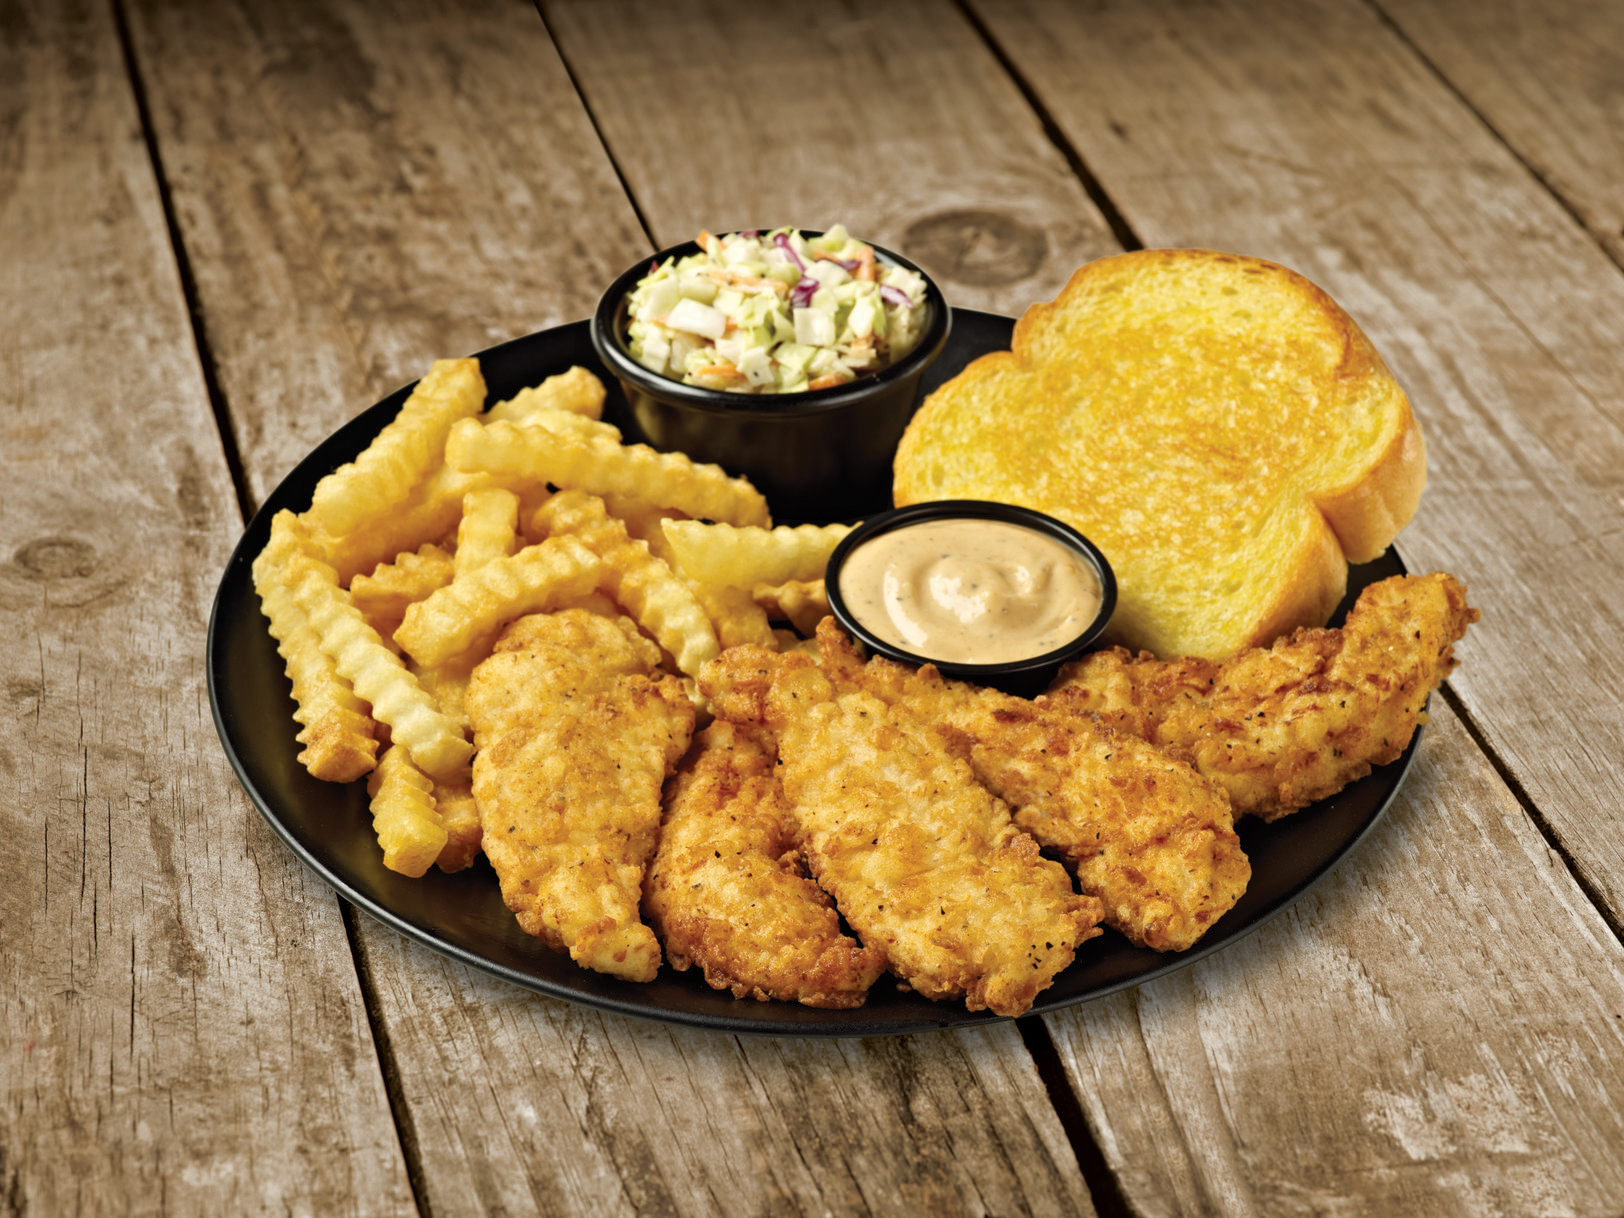 Huey Magoo’s says its tenders are all natural with no antibiotics, hormones, steroids or preservatives.